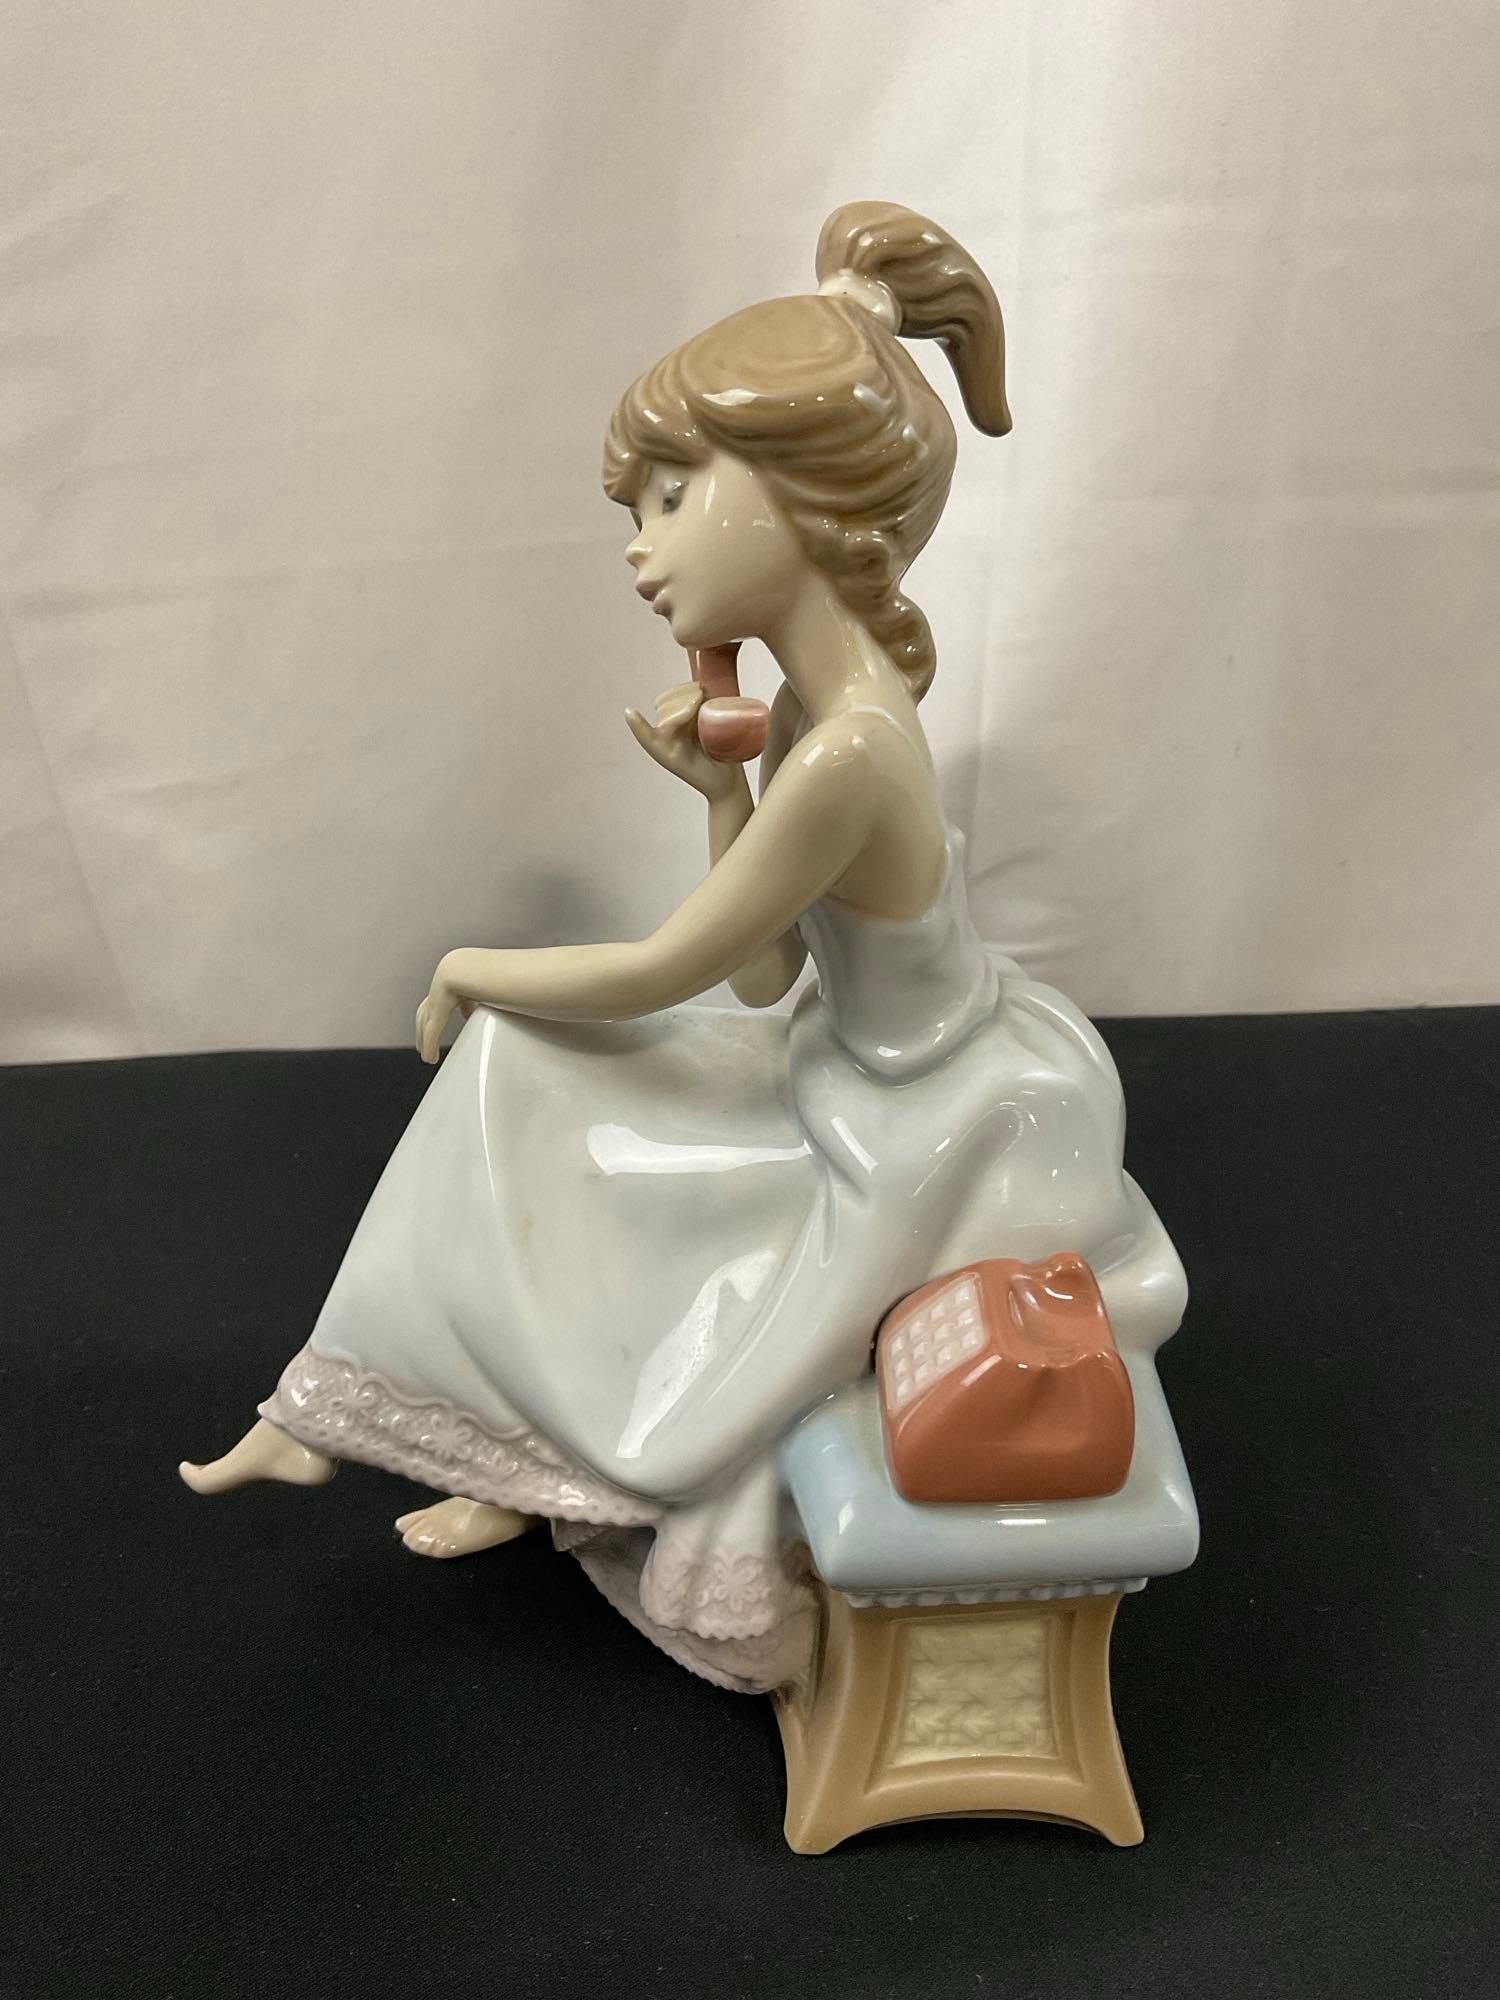 Vintage Lladro Figurine Chit Chat #5466, Girl on Phone w/ Dog at foot